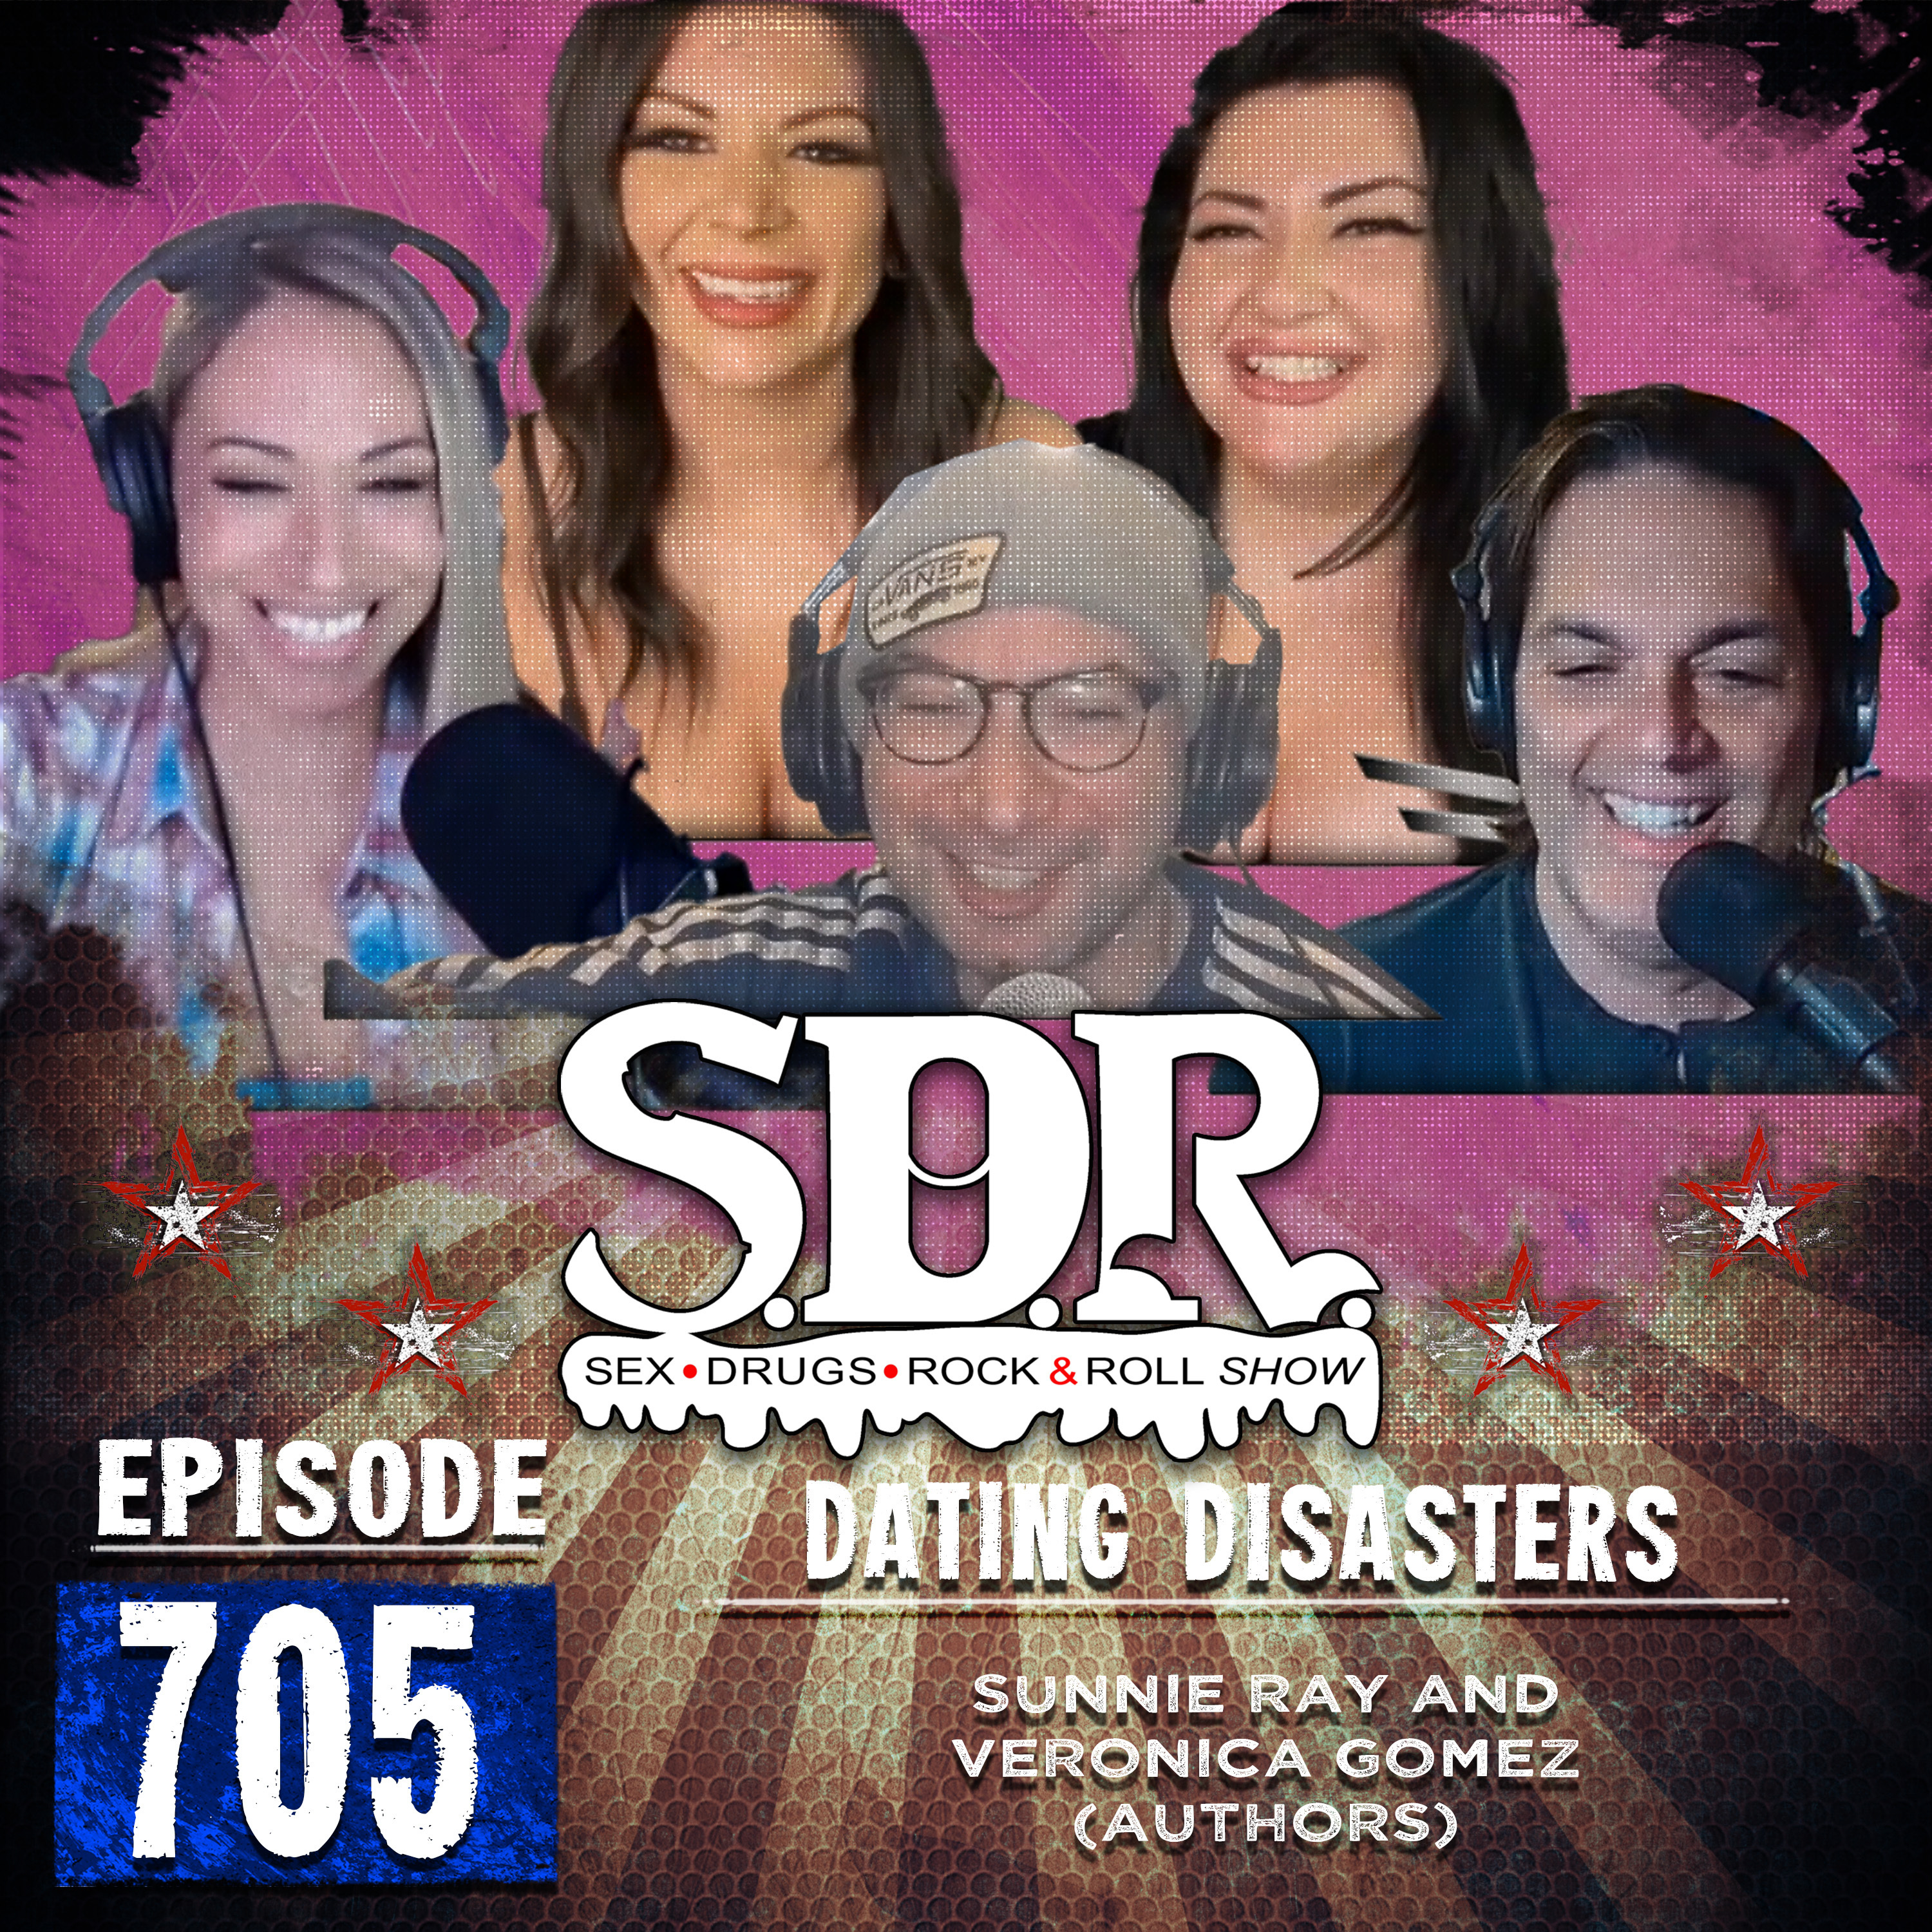 Sunnie Ray and Veronica Gomez (Authors) - Dating Disasters